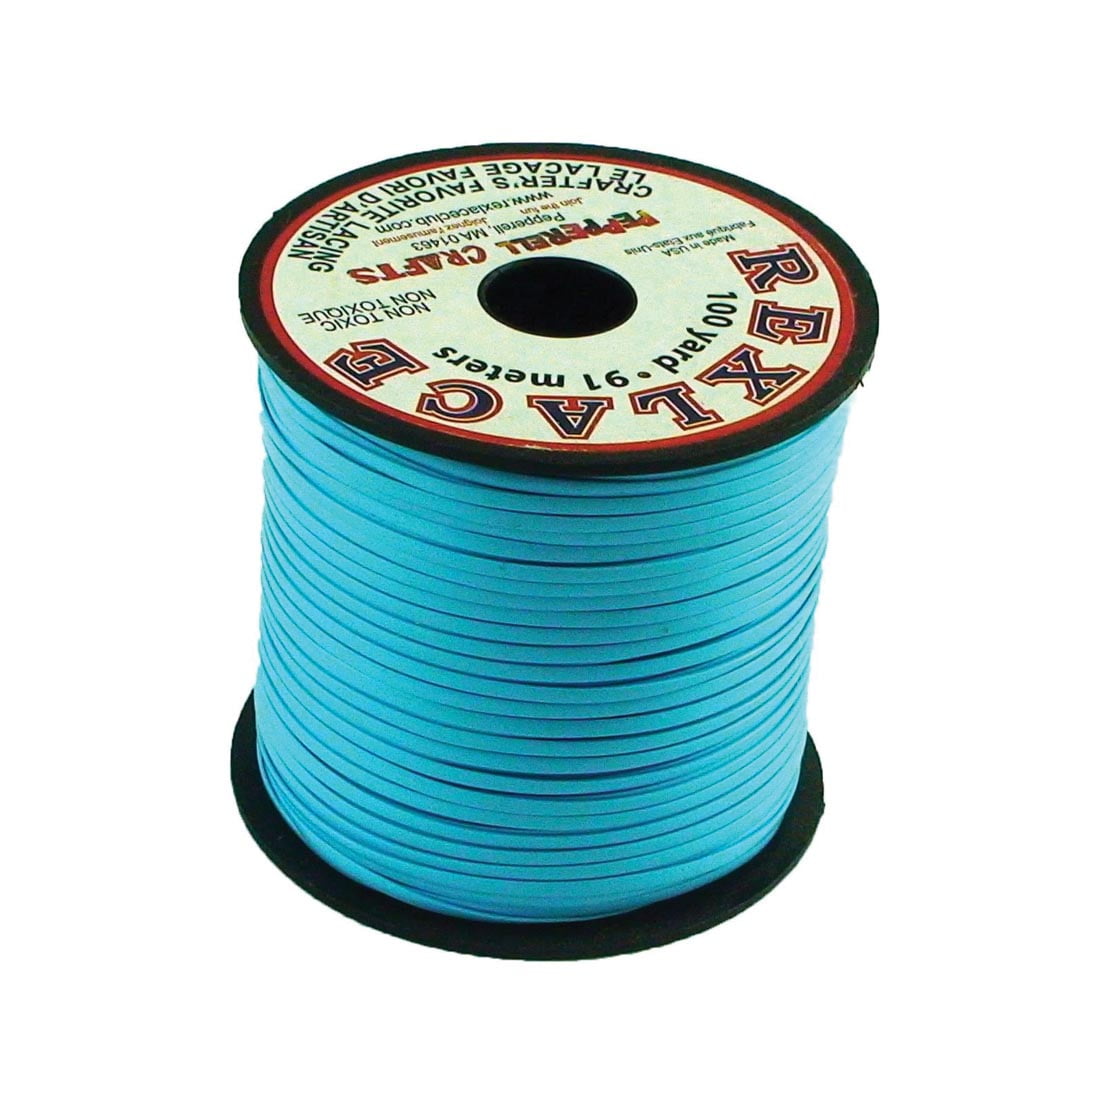 Pepperell Rexlace Plastic Lacing - 100 yards, Baby Blue - Walmart